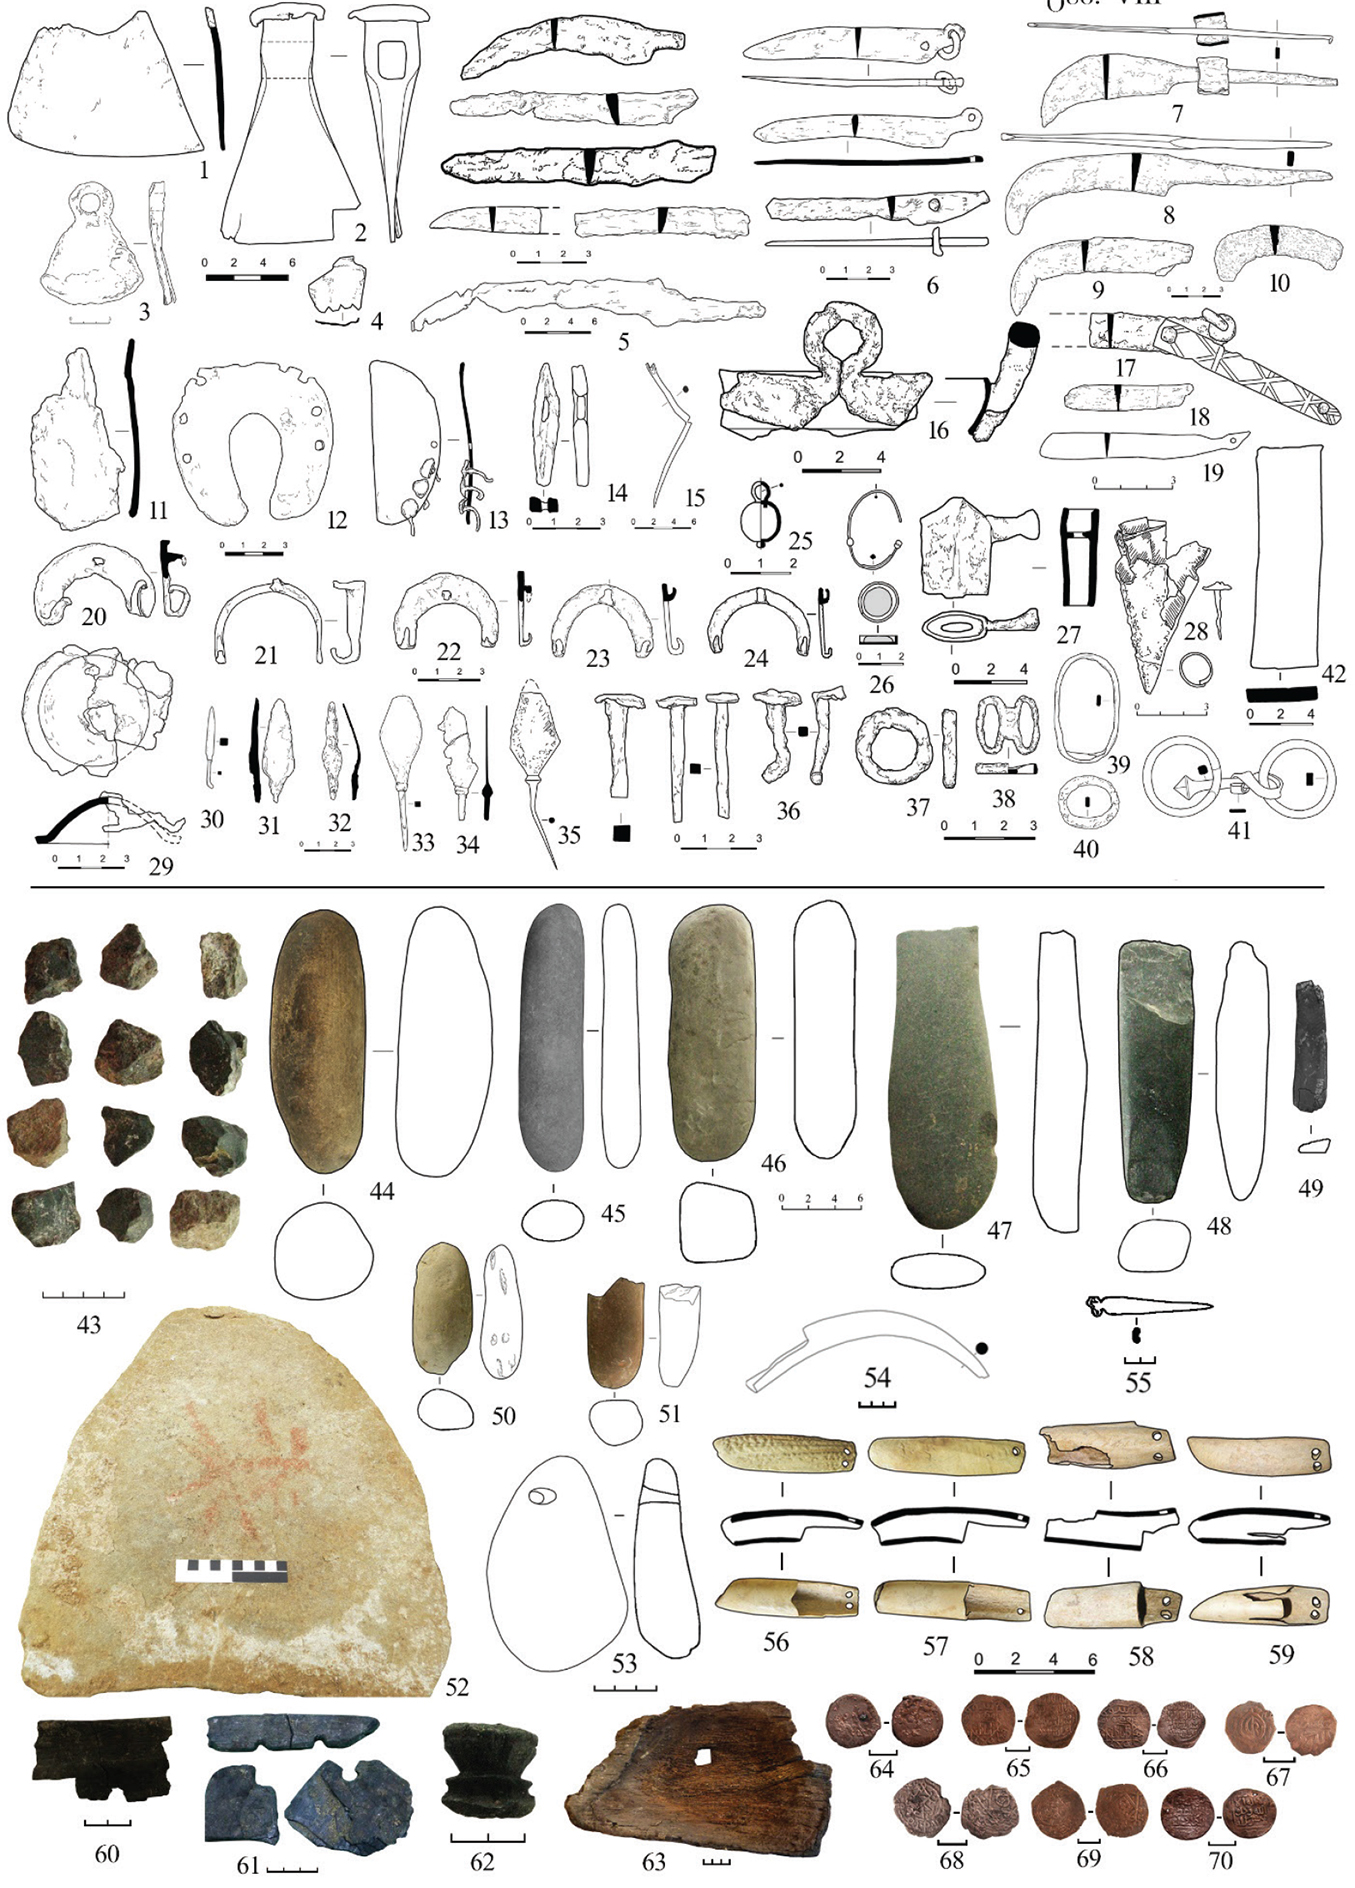 Items made of iron, stone, bone and coins